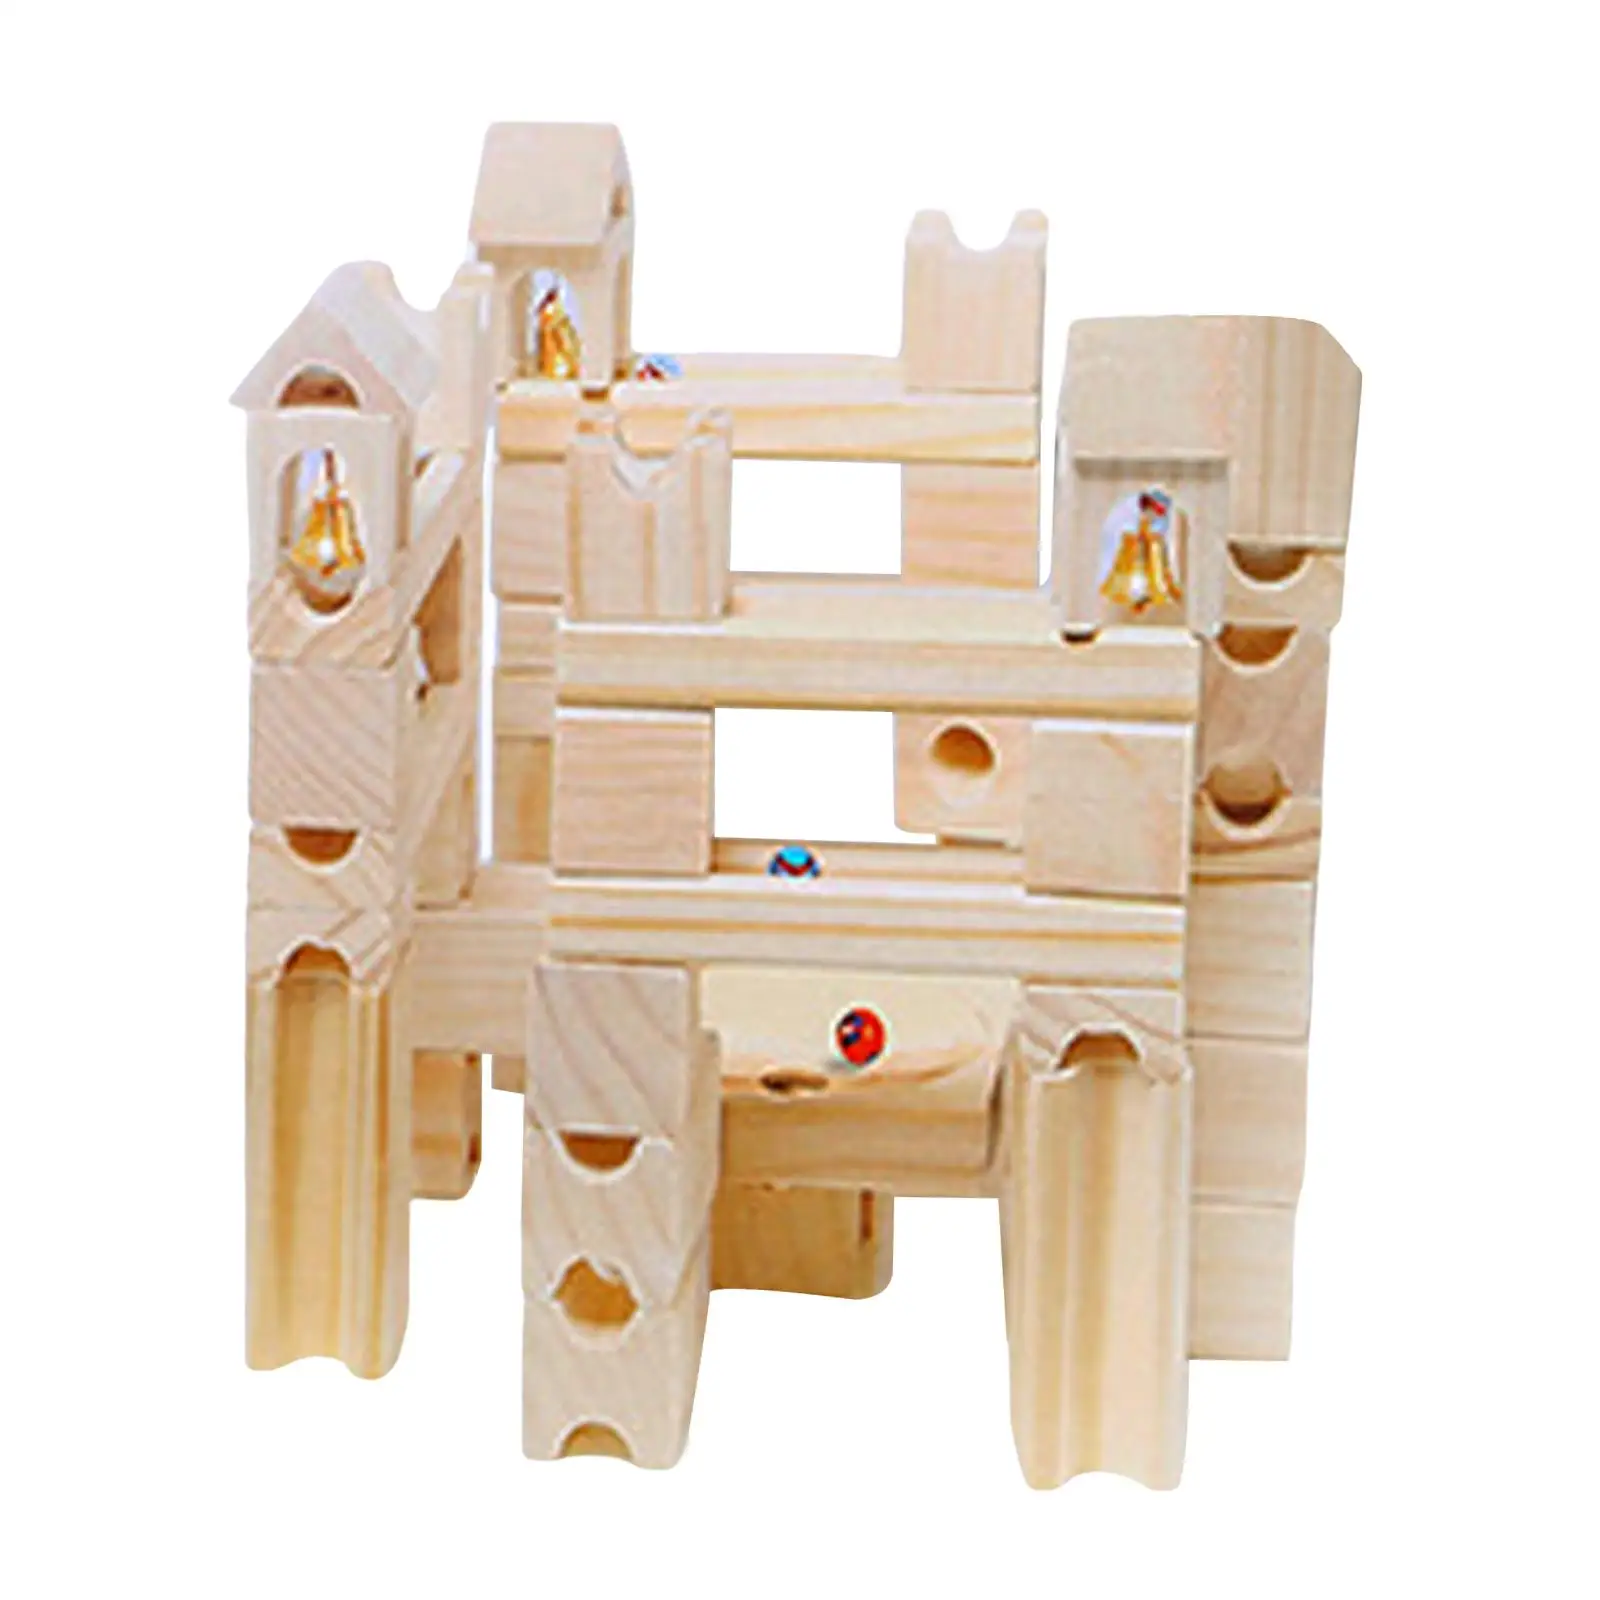 Wooden Marble Run Building Blocks Set Learning Activities Marble Track Maze Game